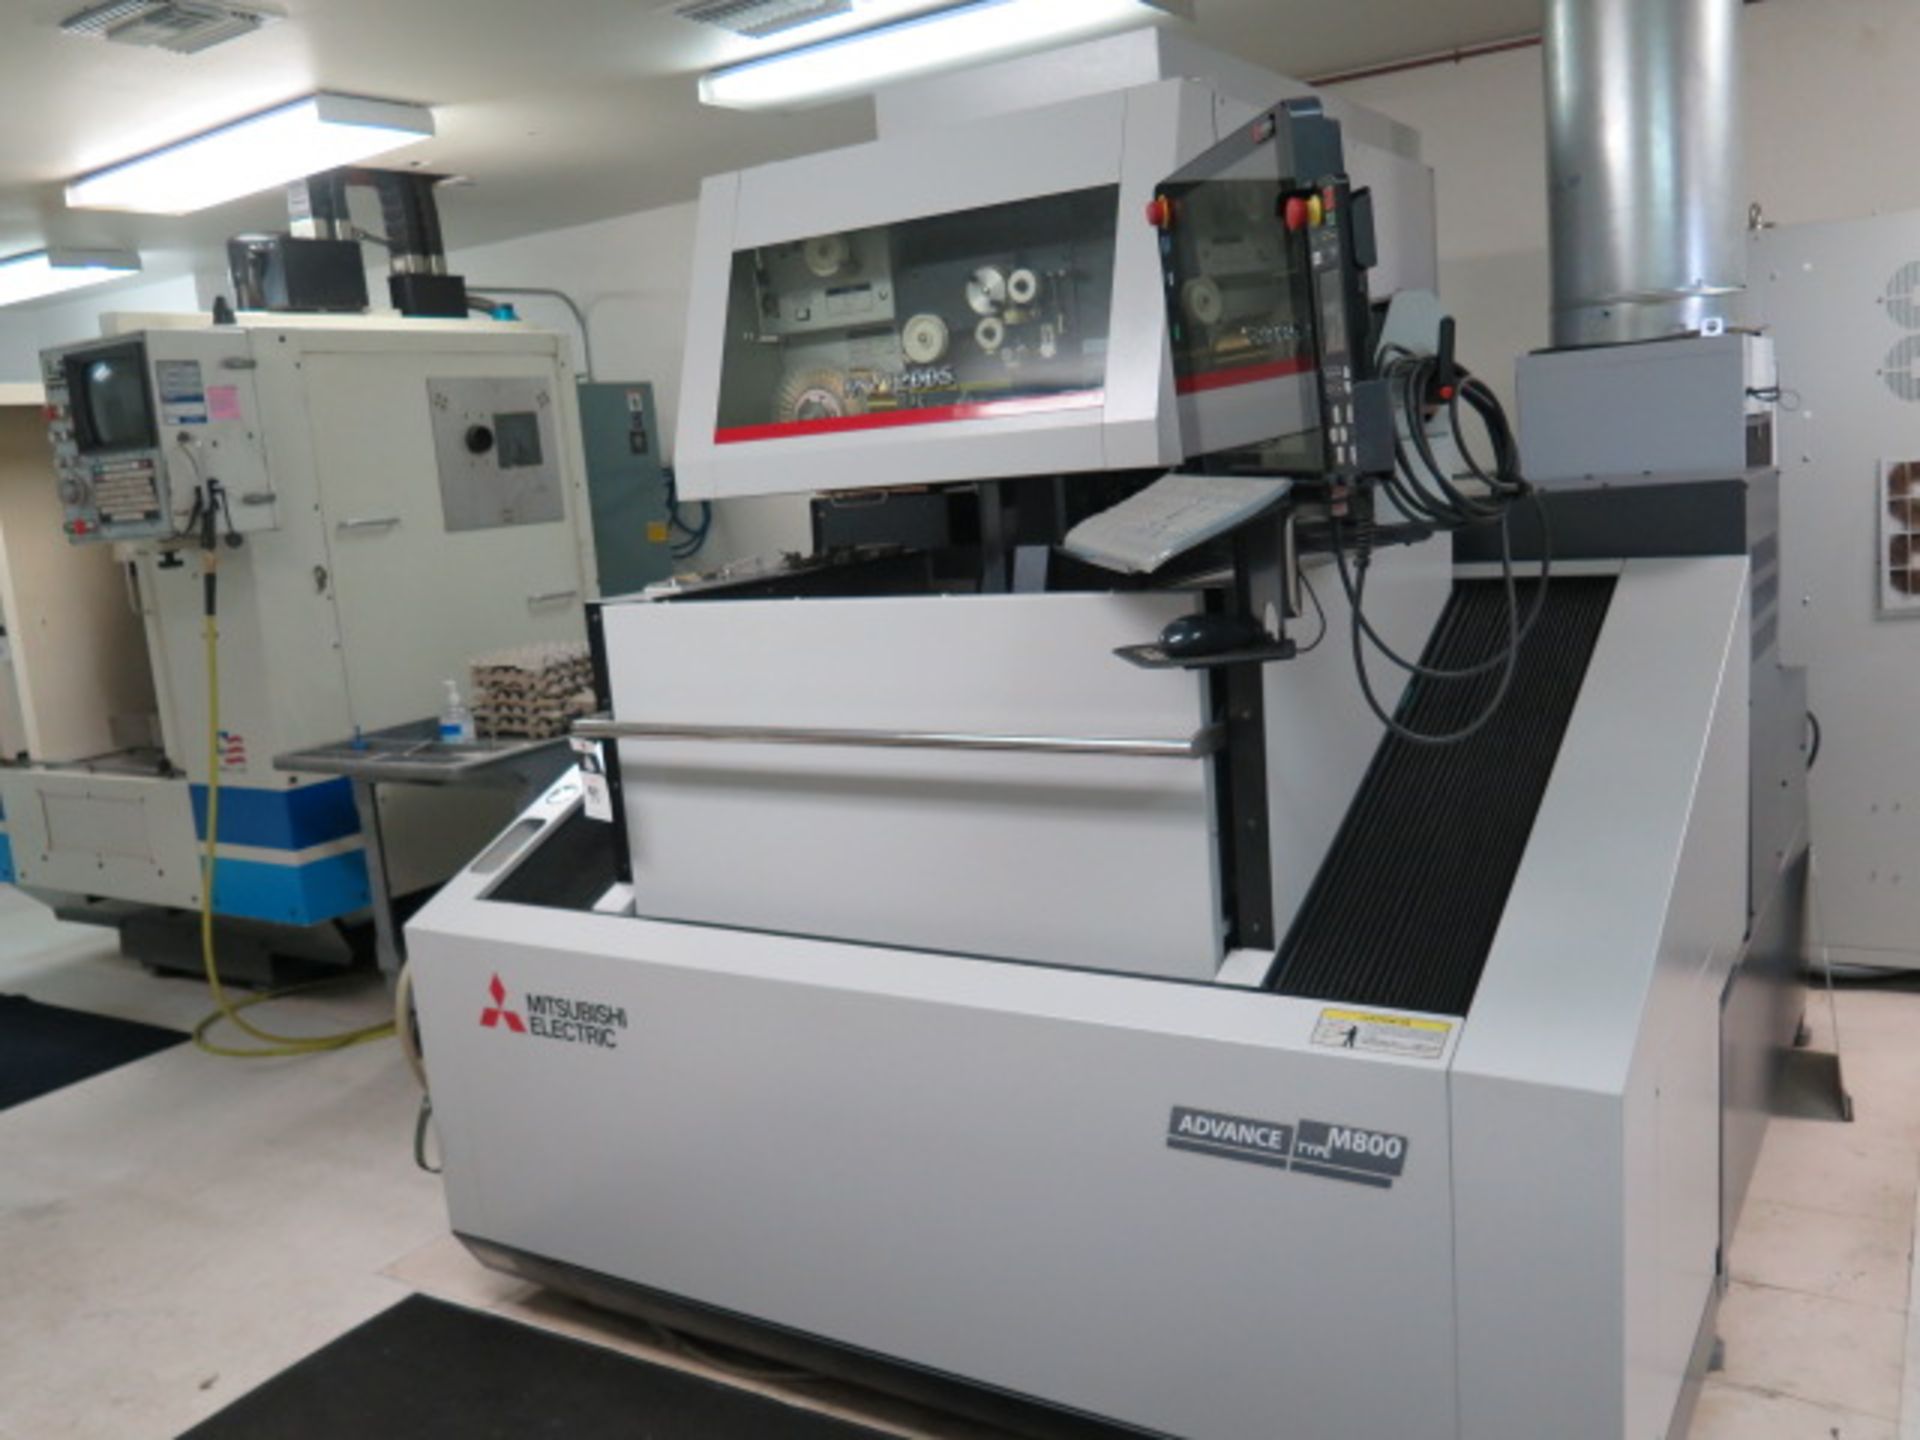 2017 Mitsubishi MV1200S Advance Type M800 CNC Wire EDM s/n D00M0078 w/ Mitsubishi D-Cubes,SOLD AS IS - Image 2 of 22